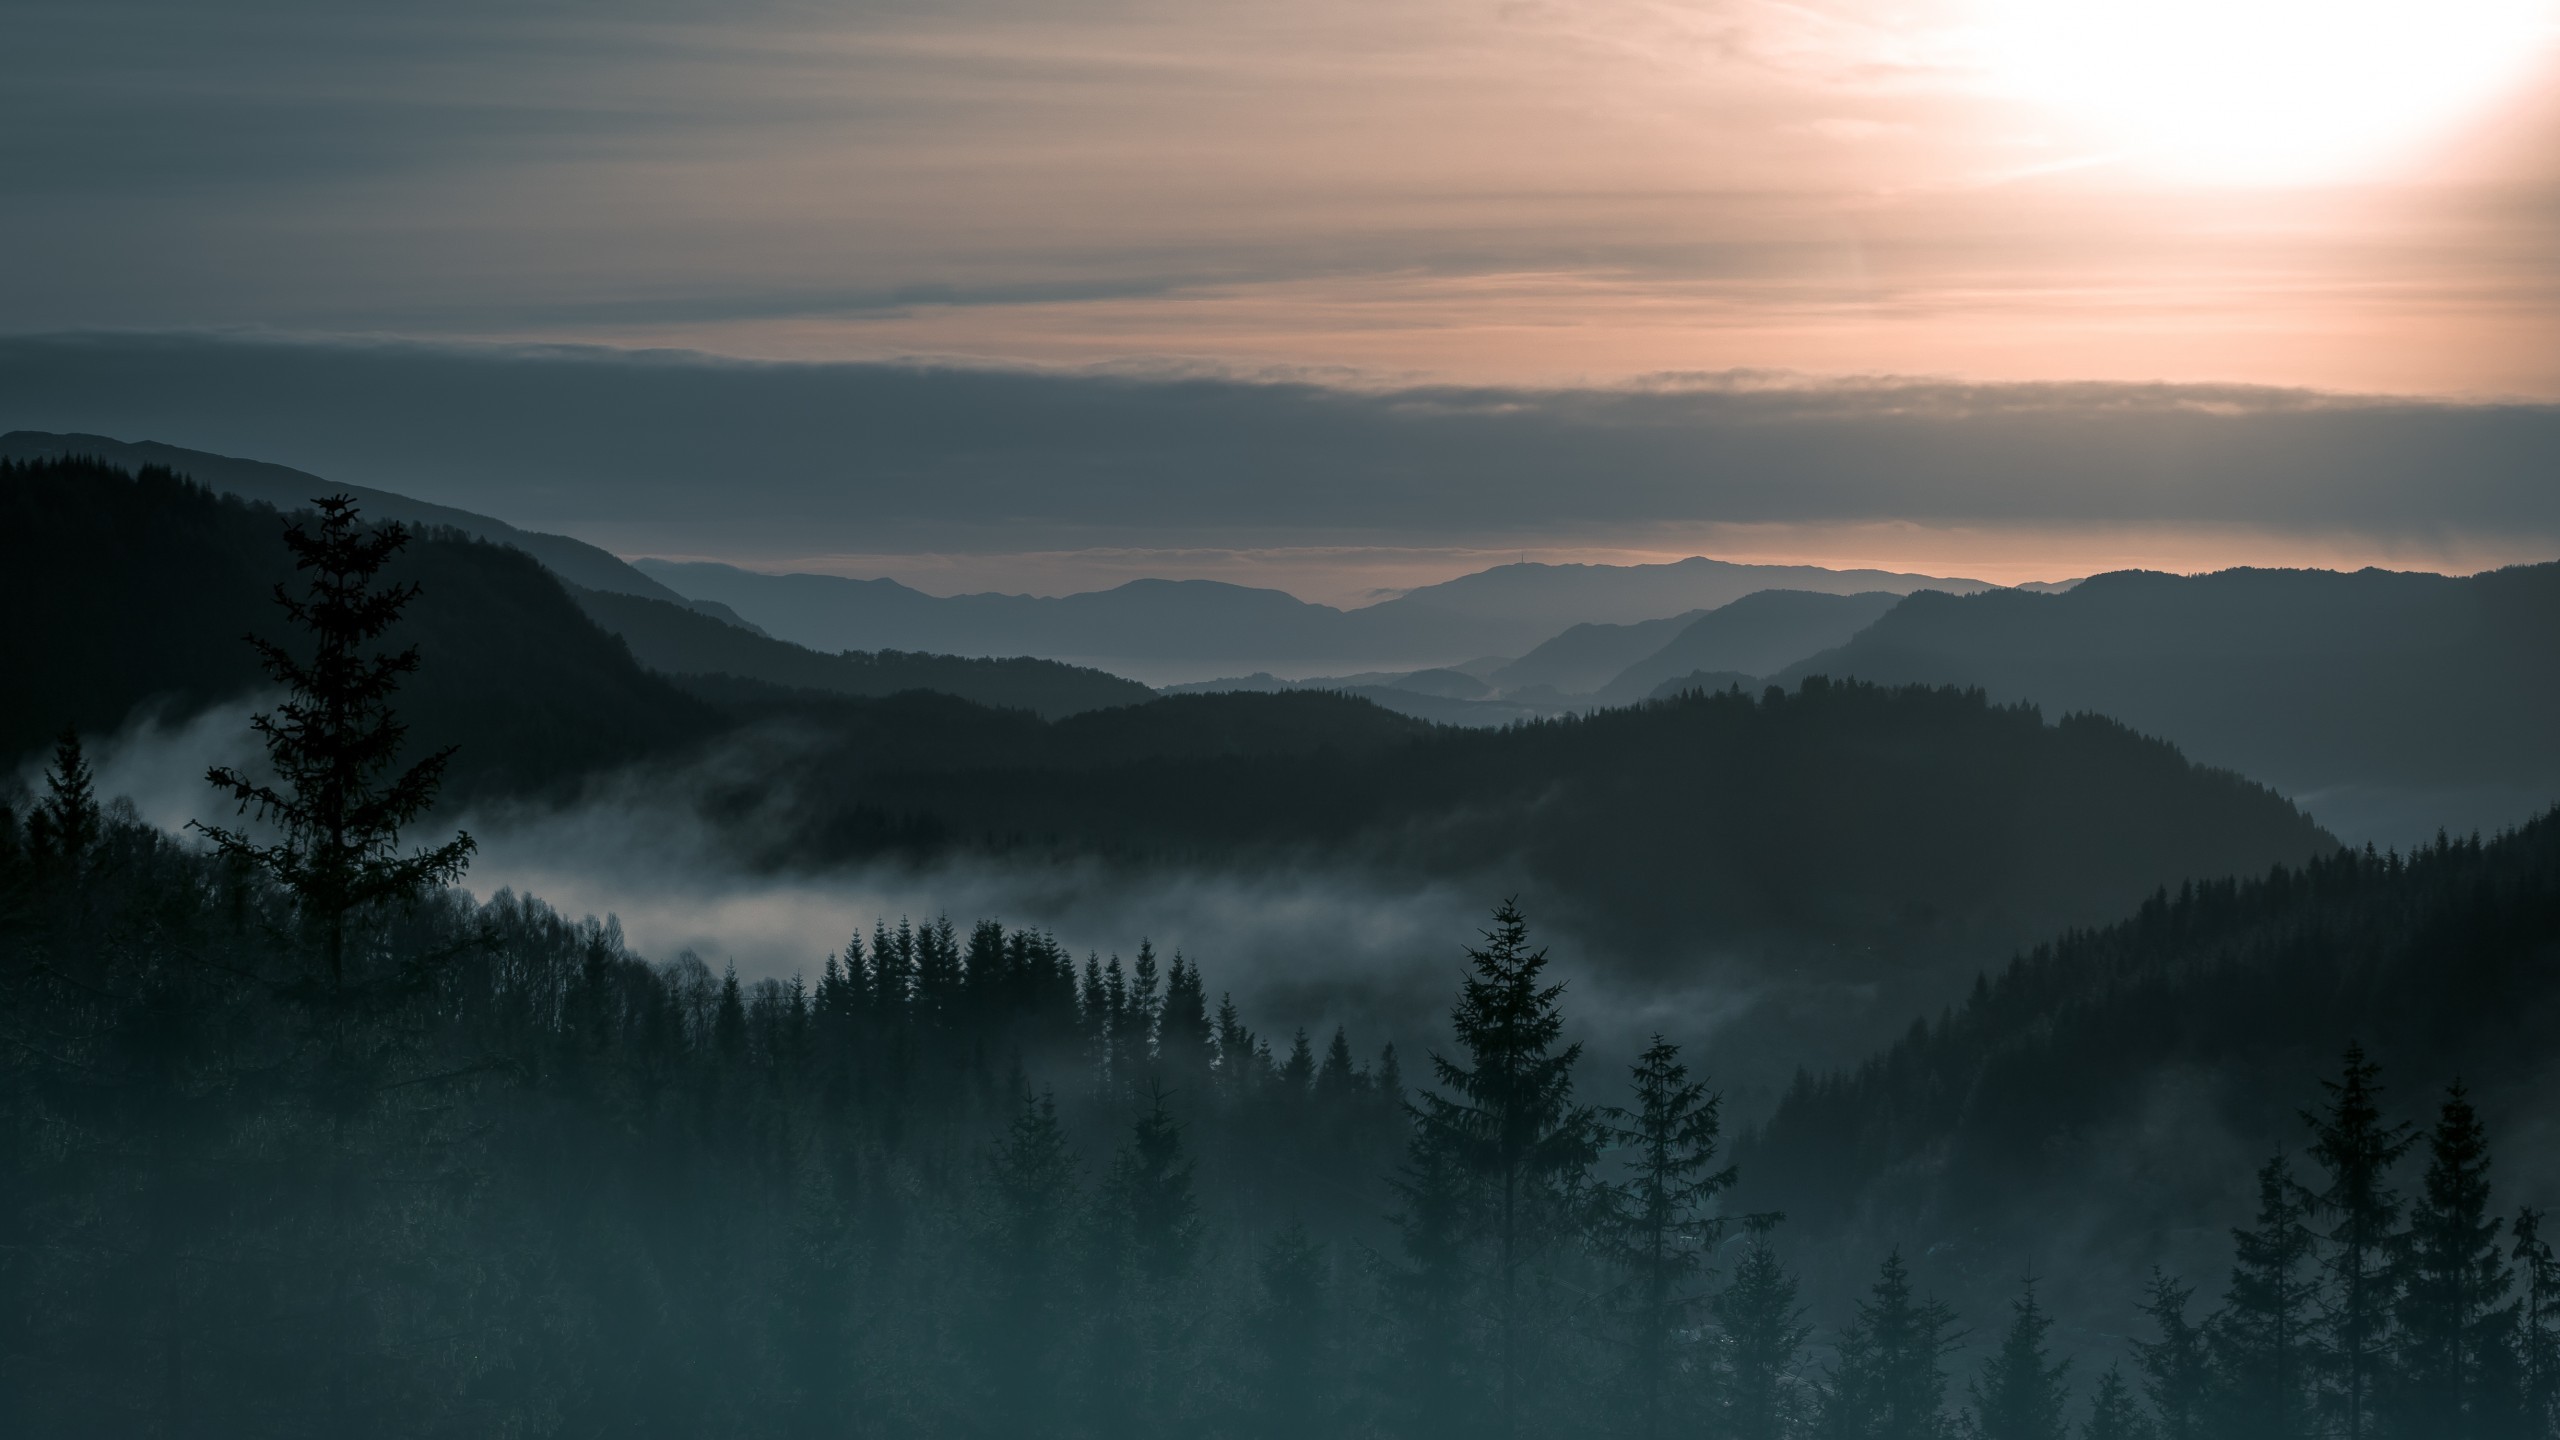 General 2560x1440 nature landscape trees forest pine trees mountains Norway mist hills clouds nordic landscapes